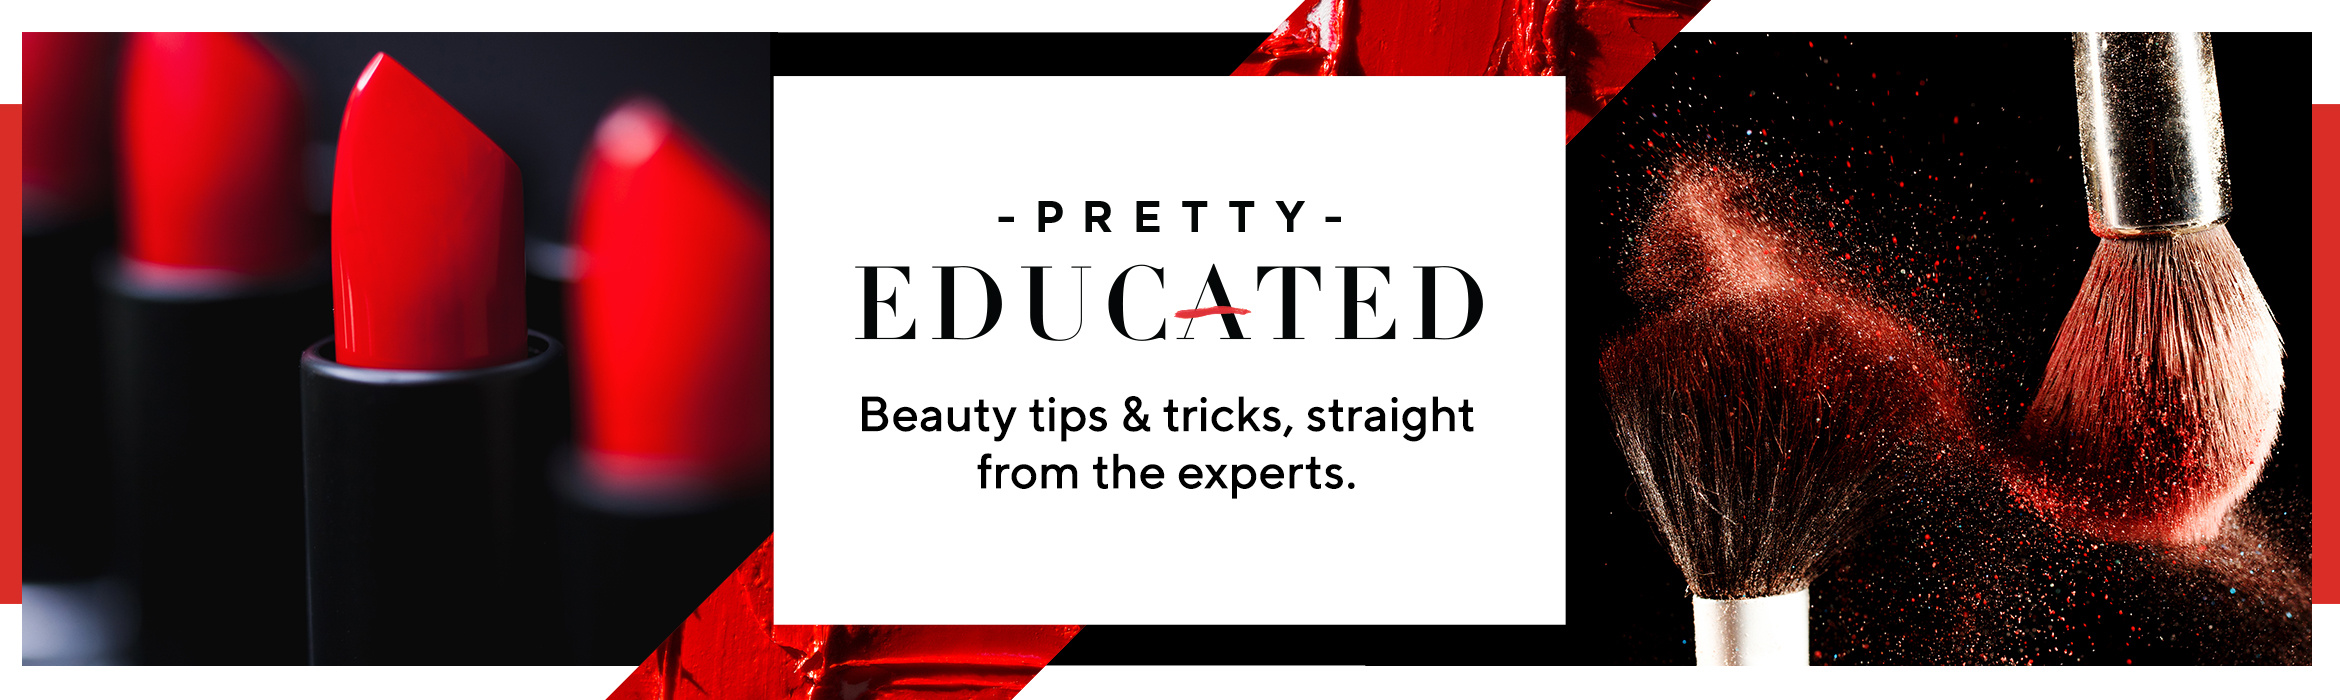 Beauty tips & tricks, straight from the experts.